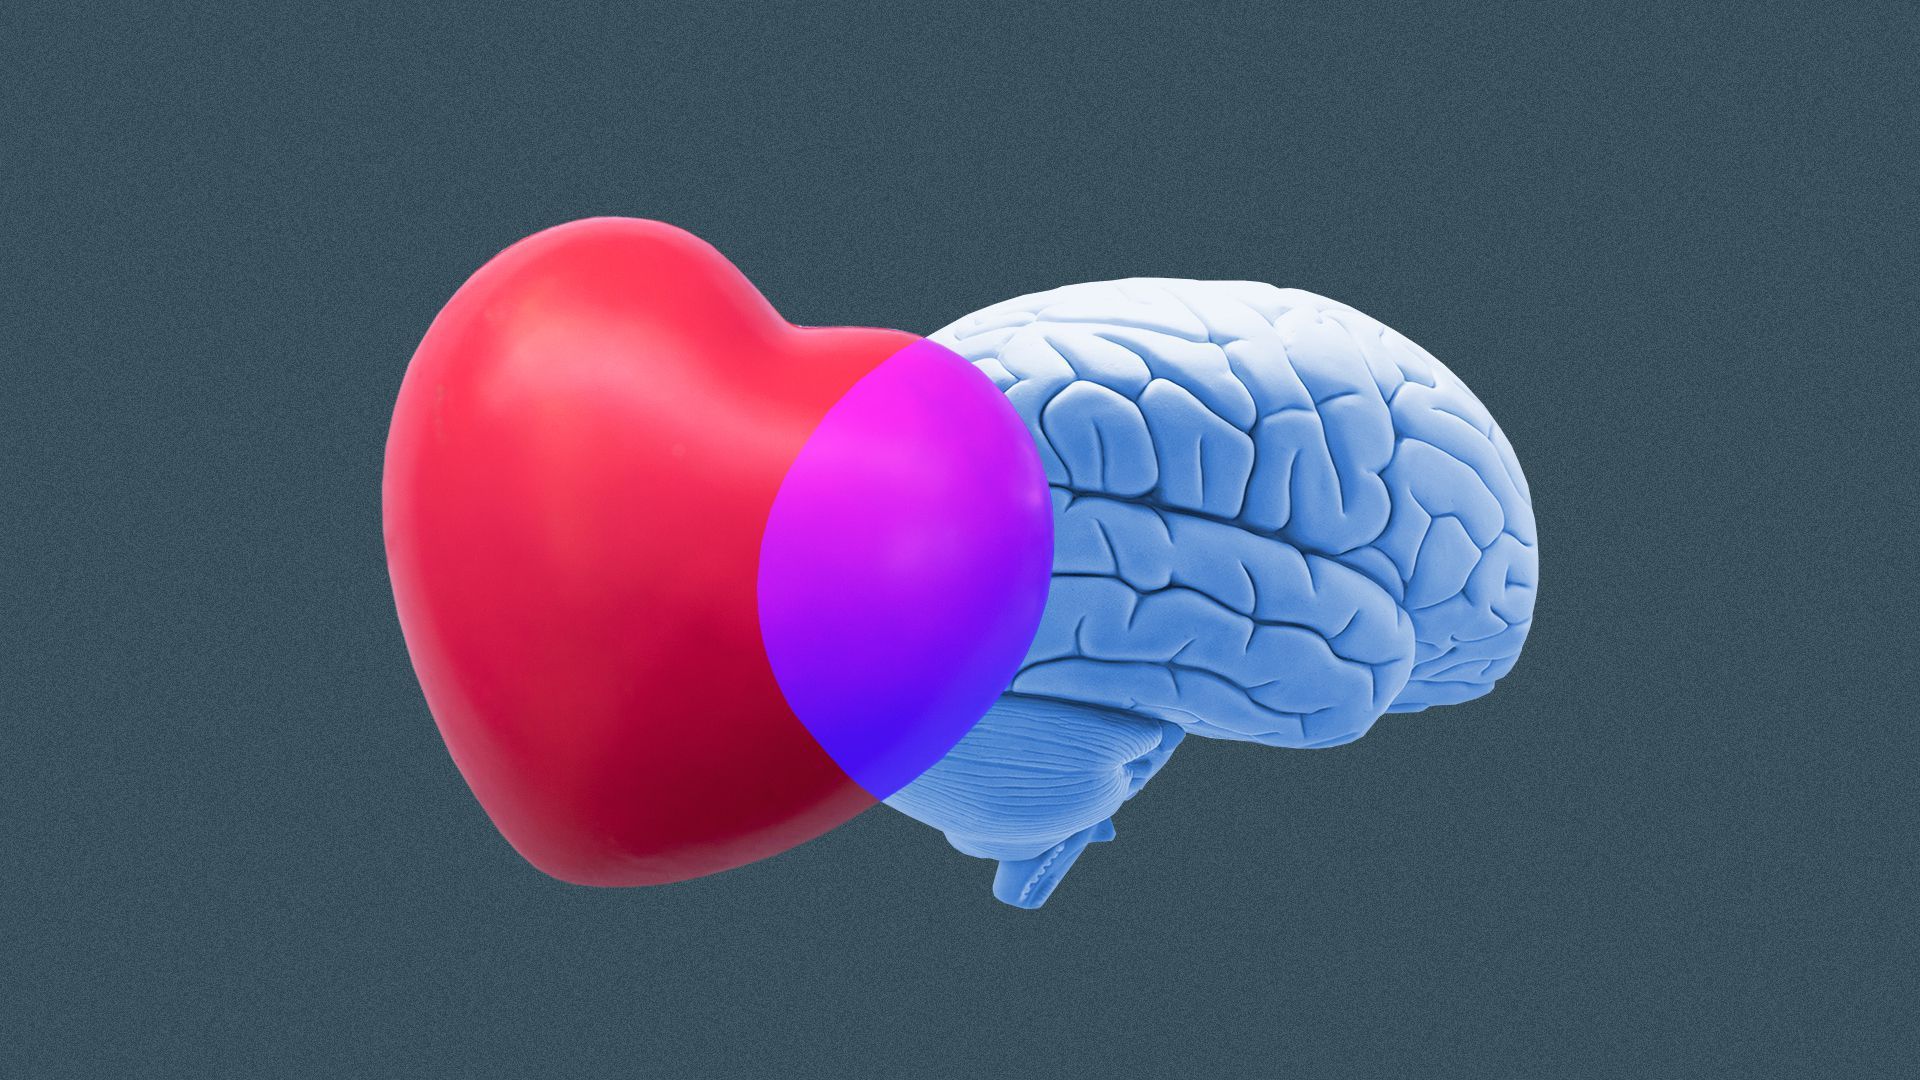 A stylized image of a heart colliding with a brain.